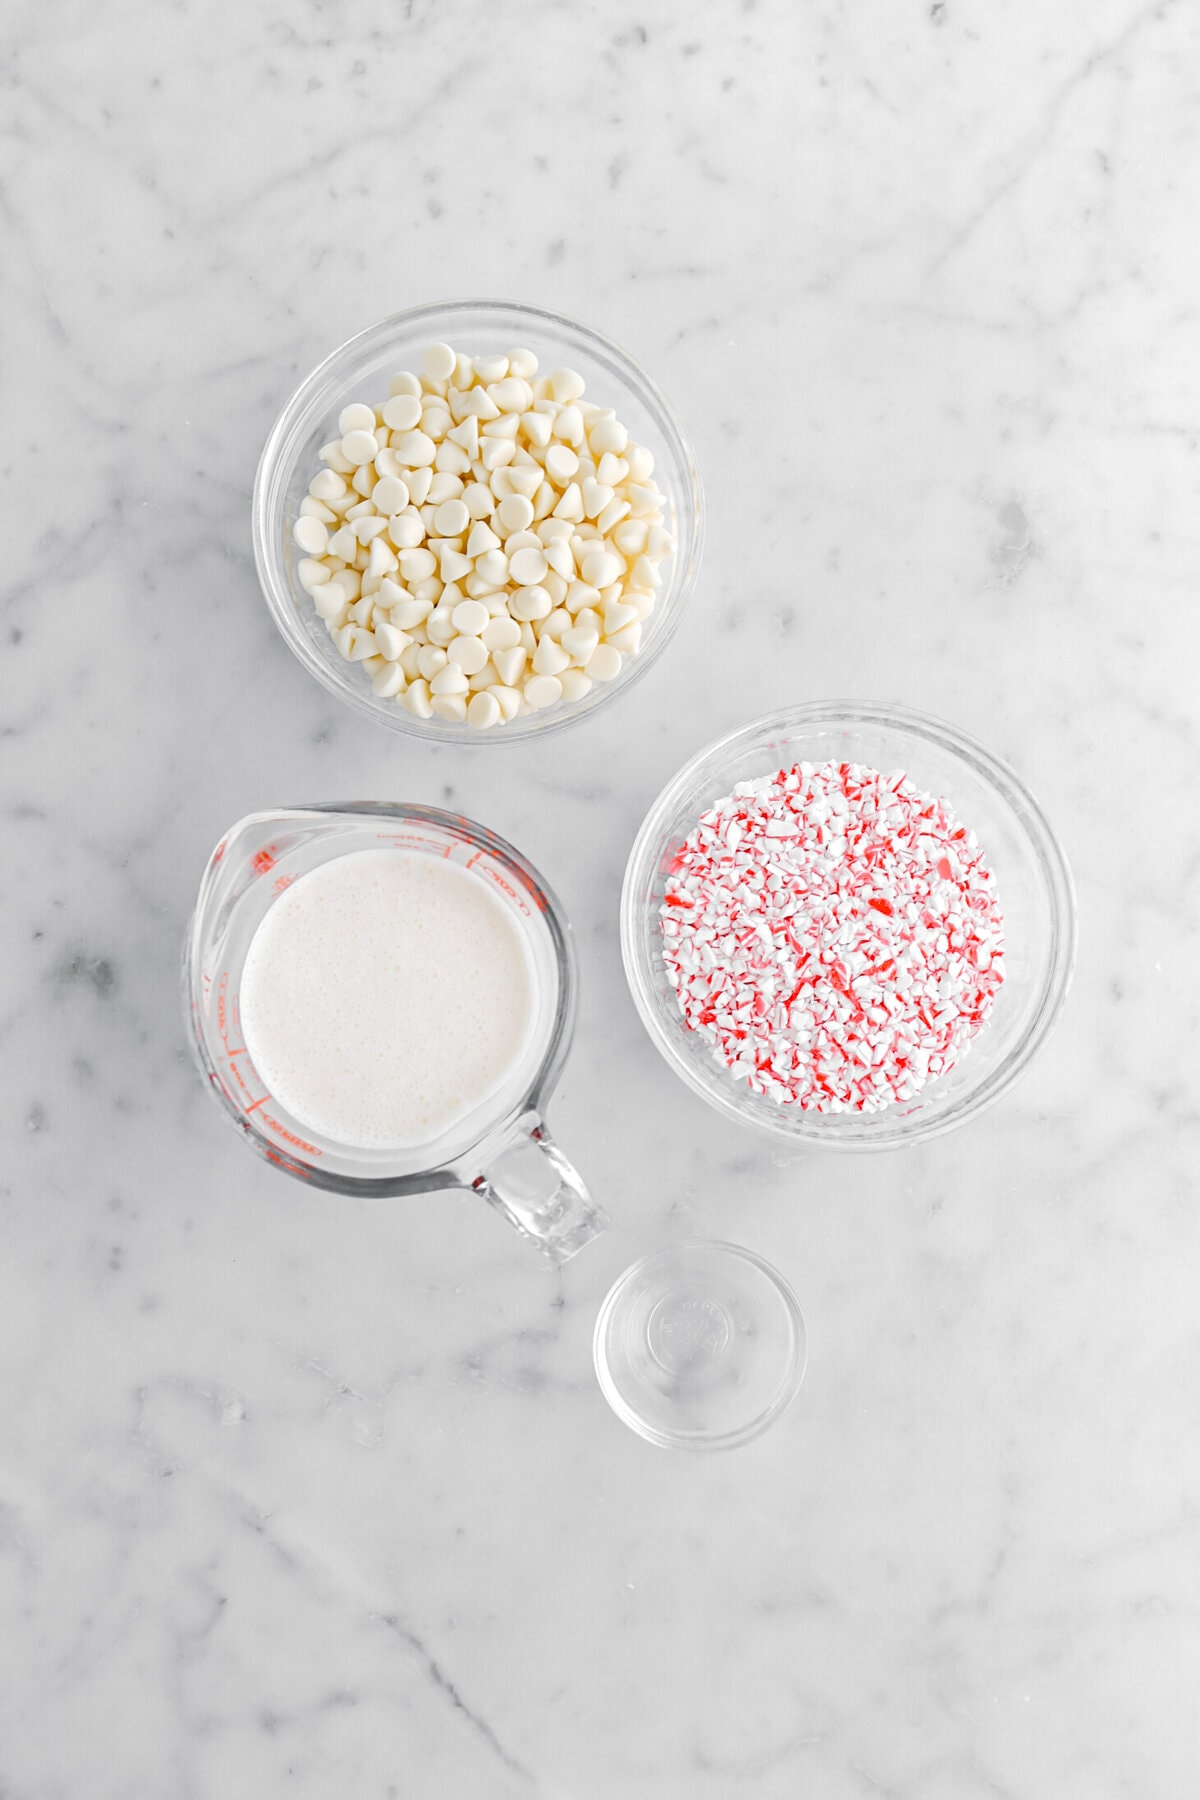 white chocolate chips, cream, crushed candy canes, and peppermint extract on marble surface.